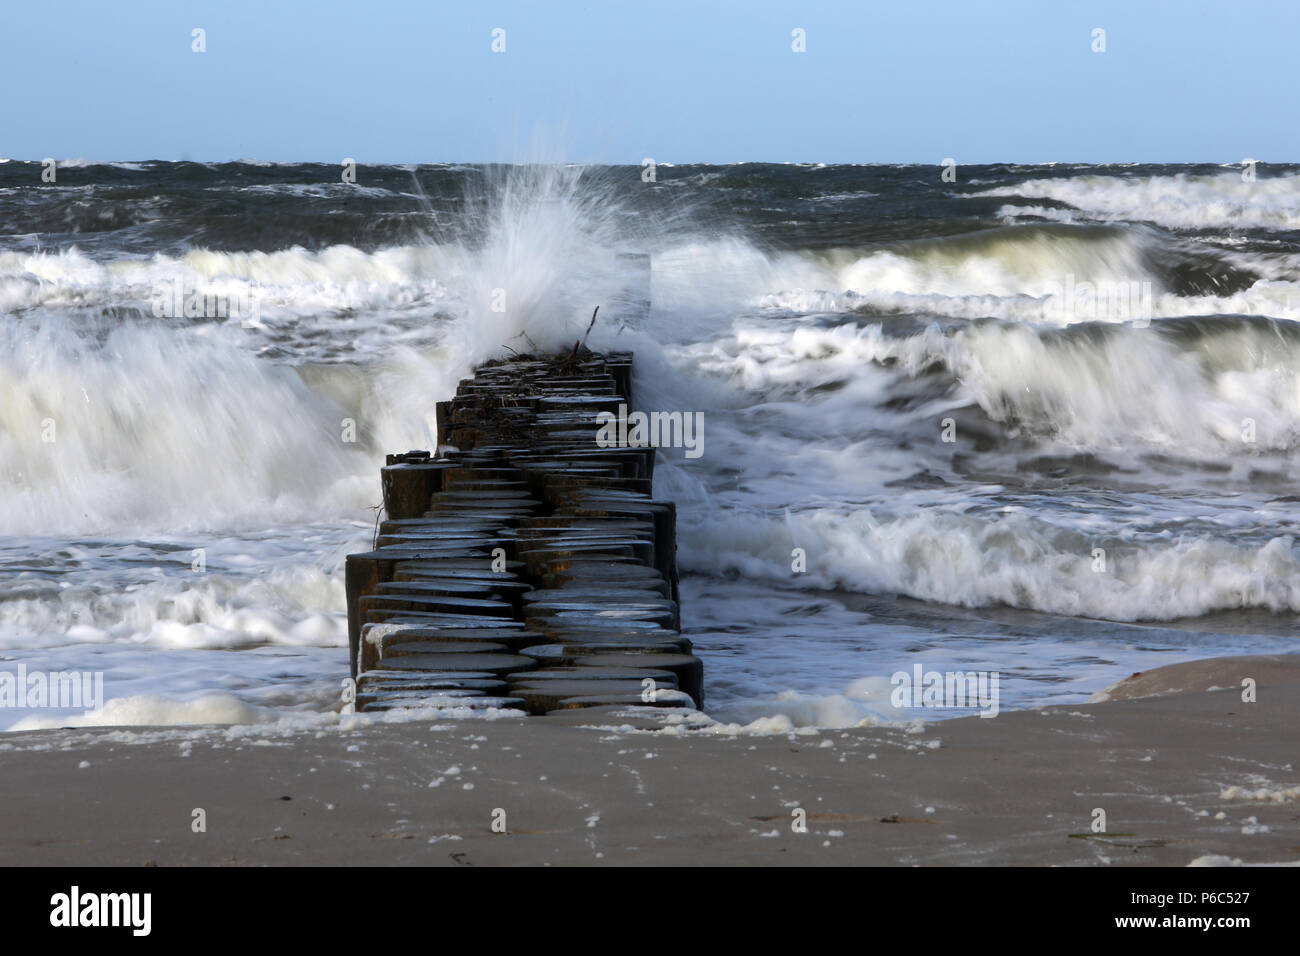 Wustrow, Germany - swell on the Baltic Sea Stock Photo